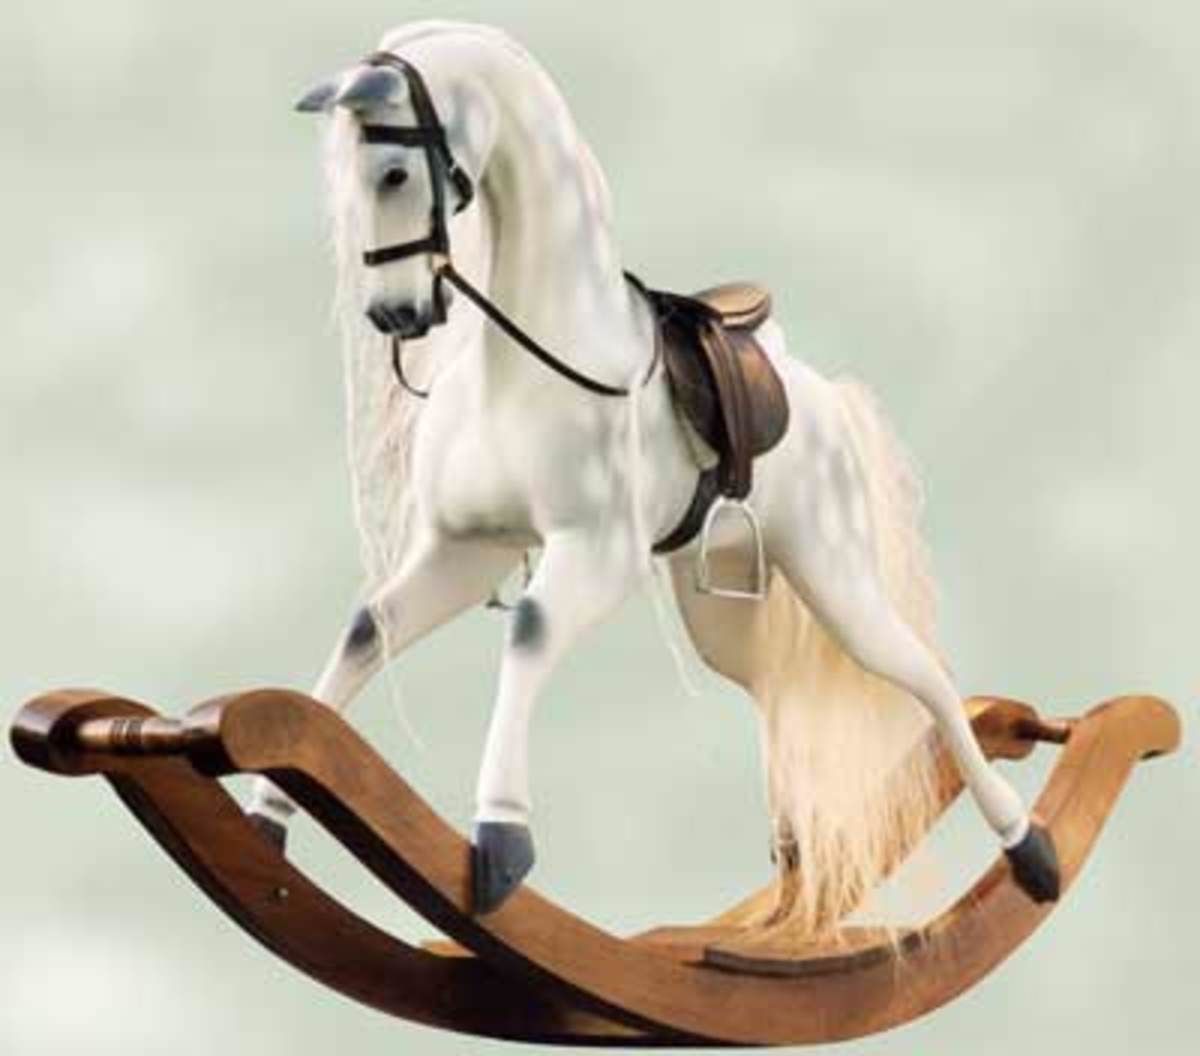 I Want to Buy an Antique Rocking Horse.